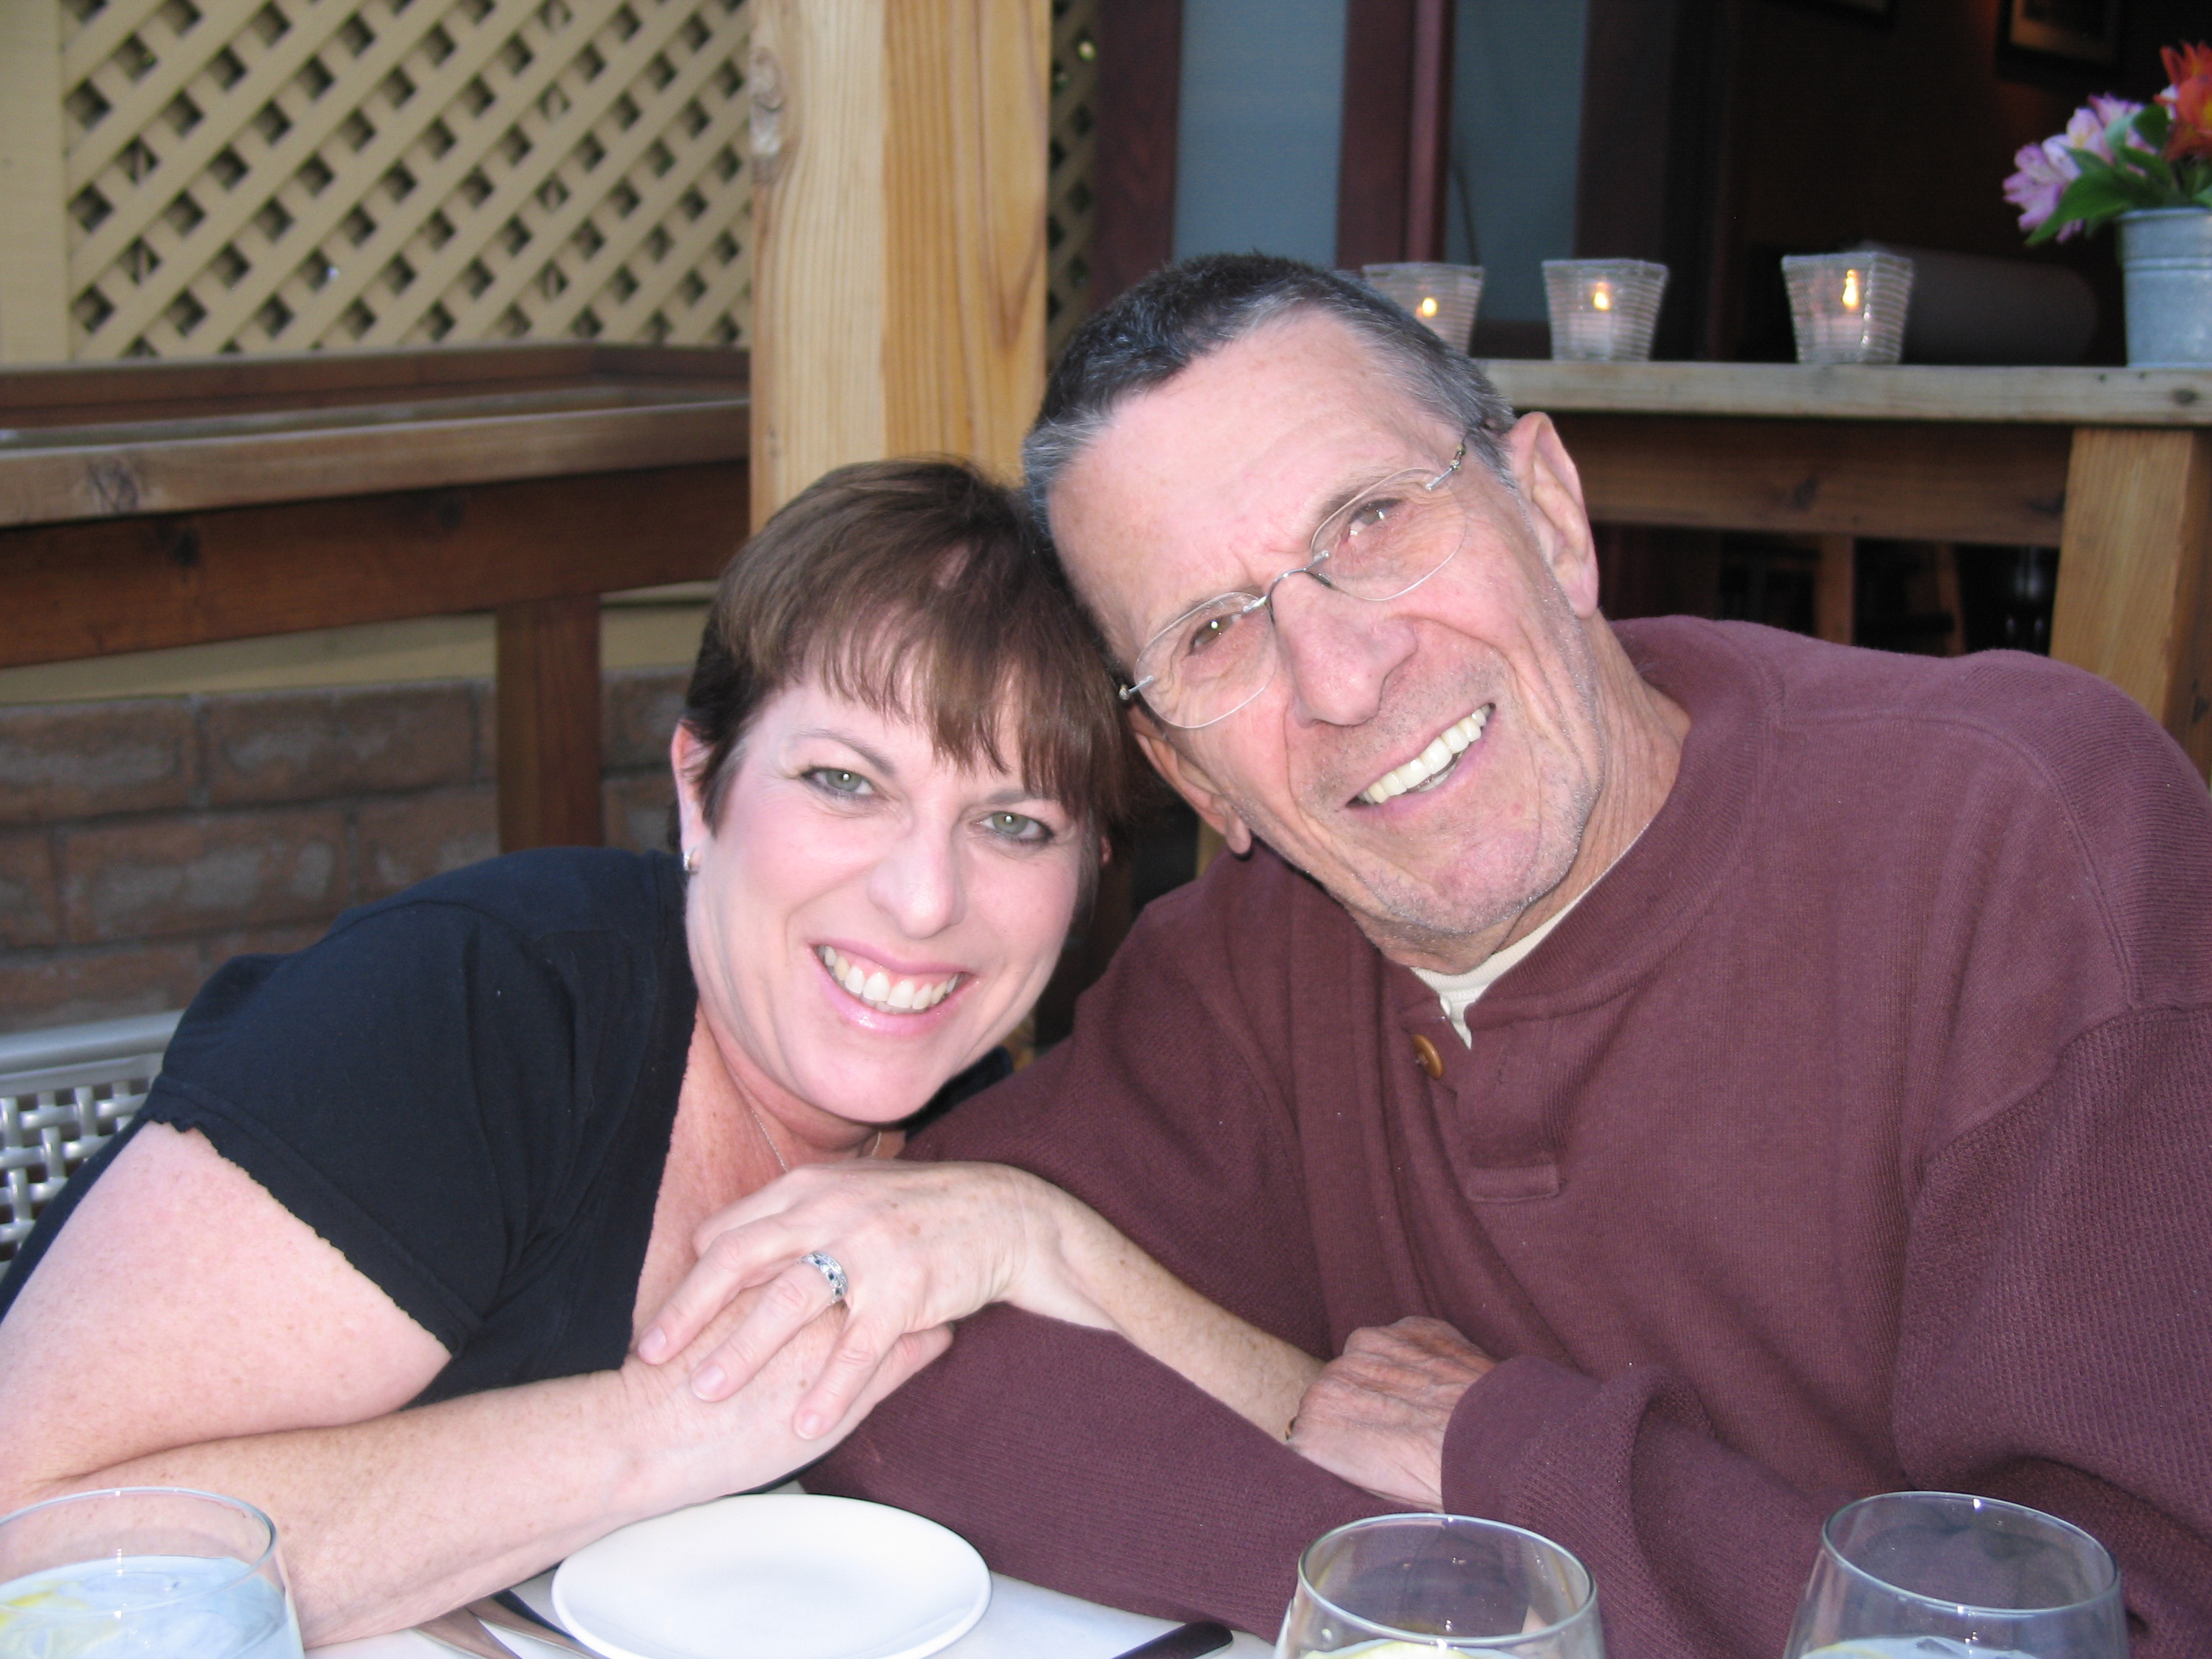 Julie Nimoy with her father, Leonard Nimoy